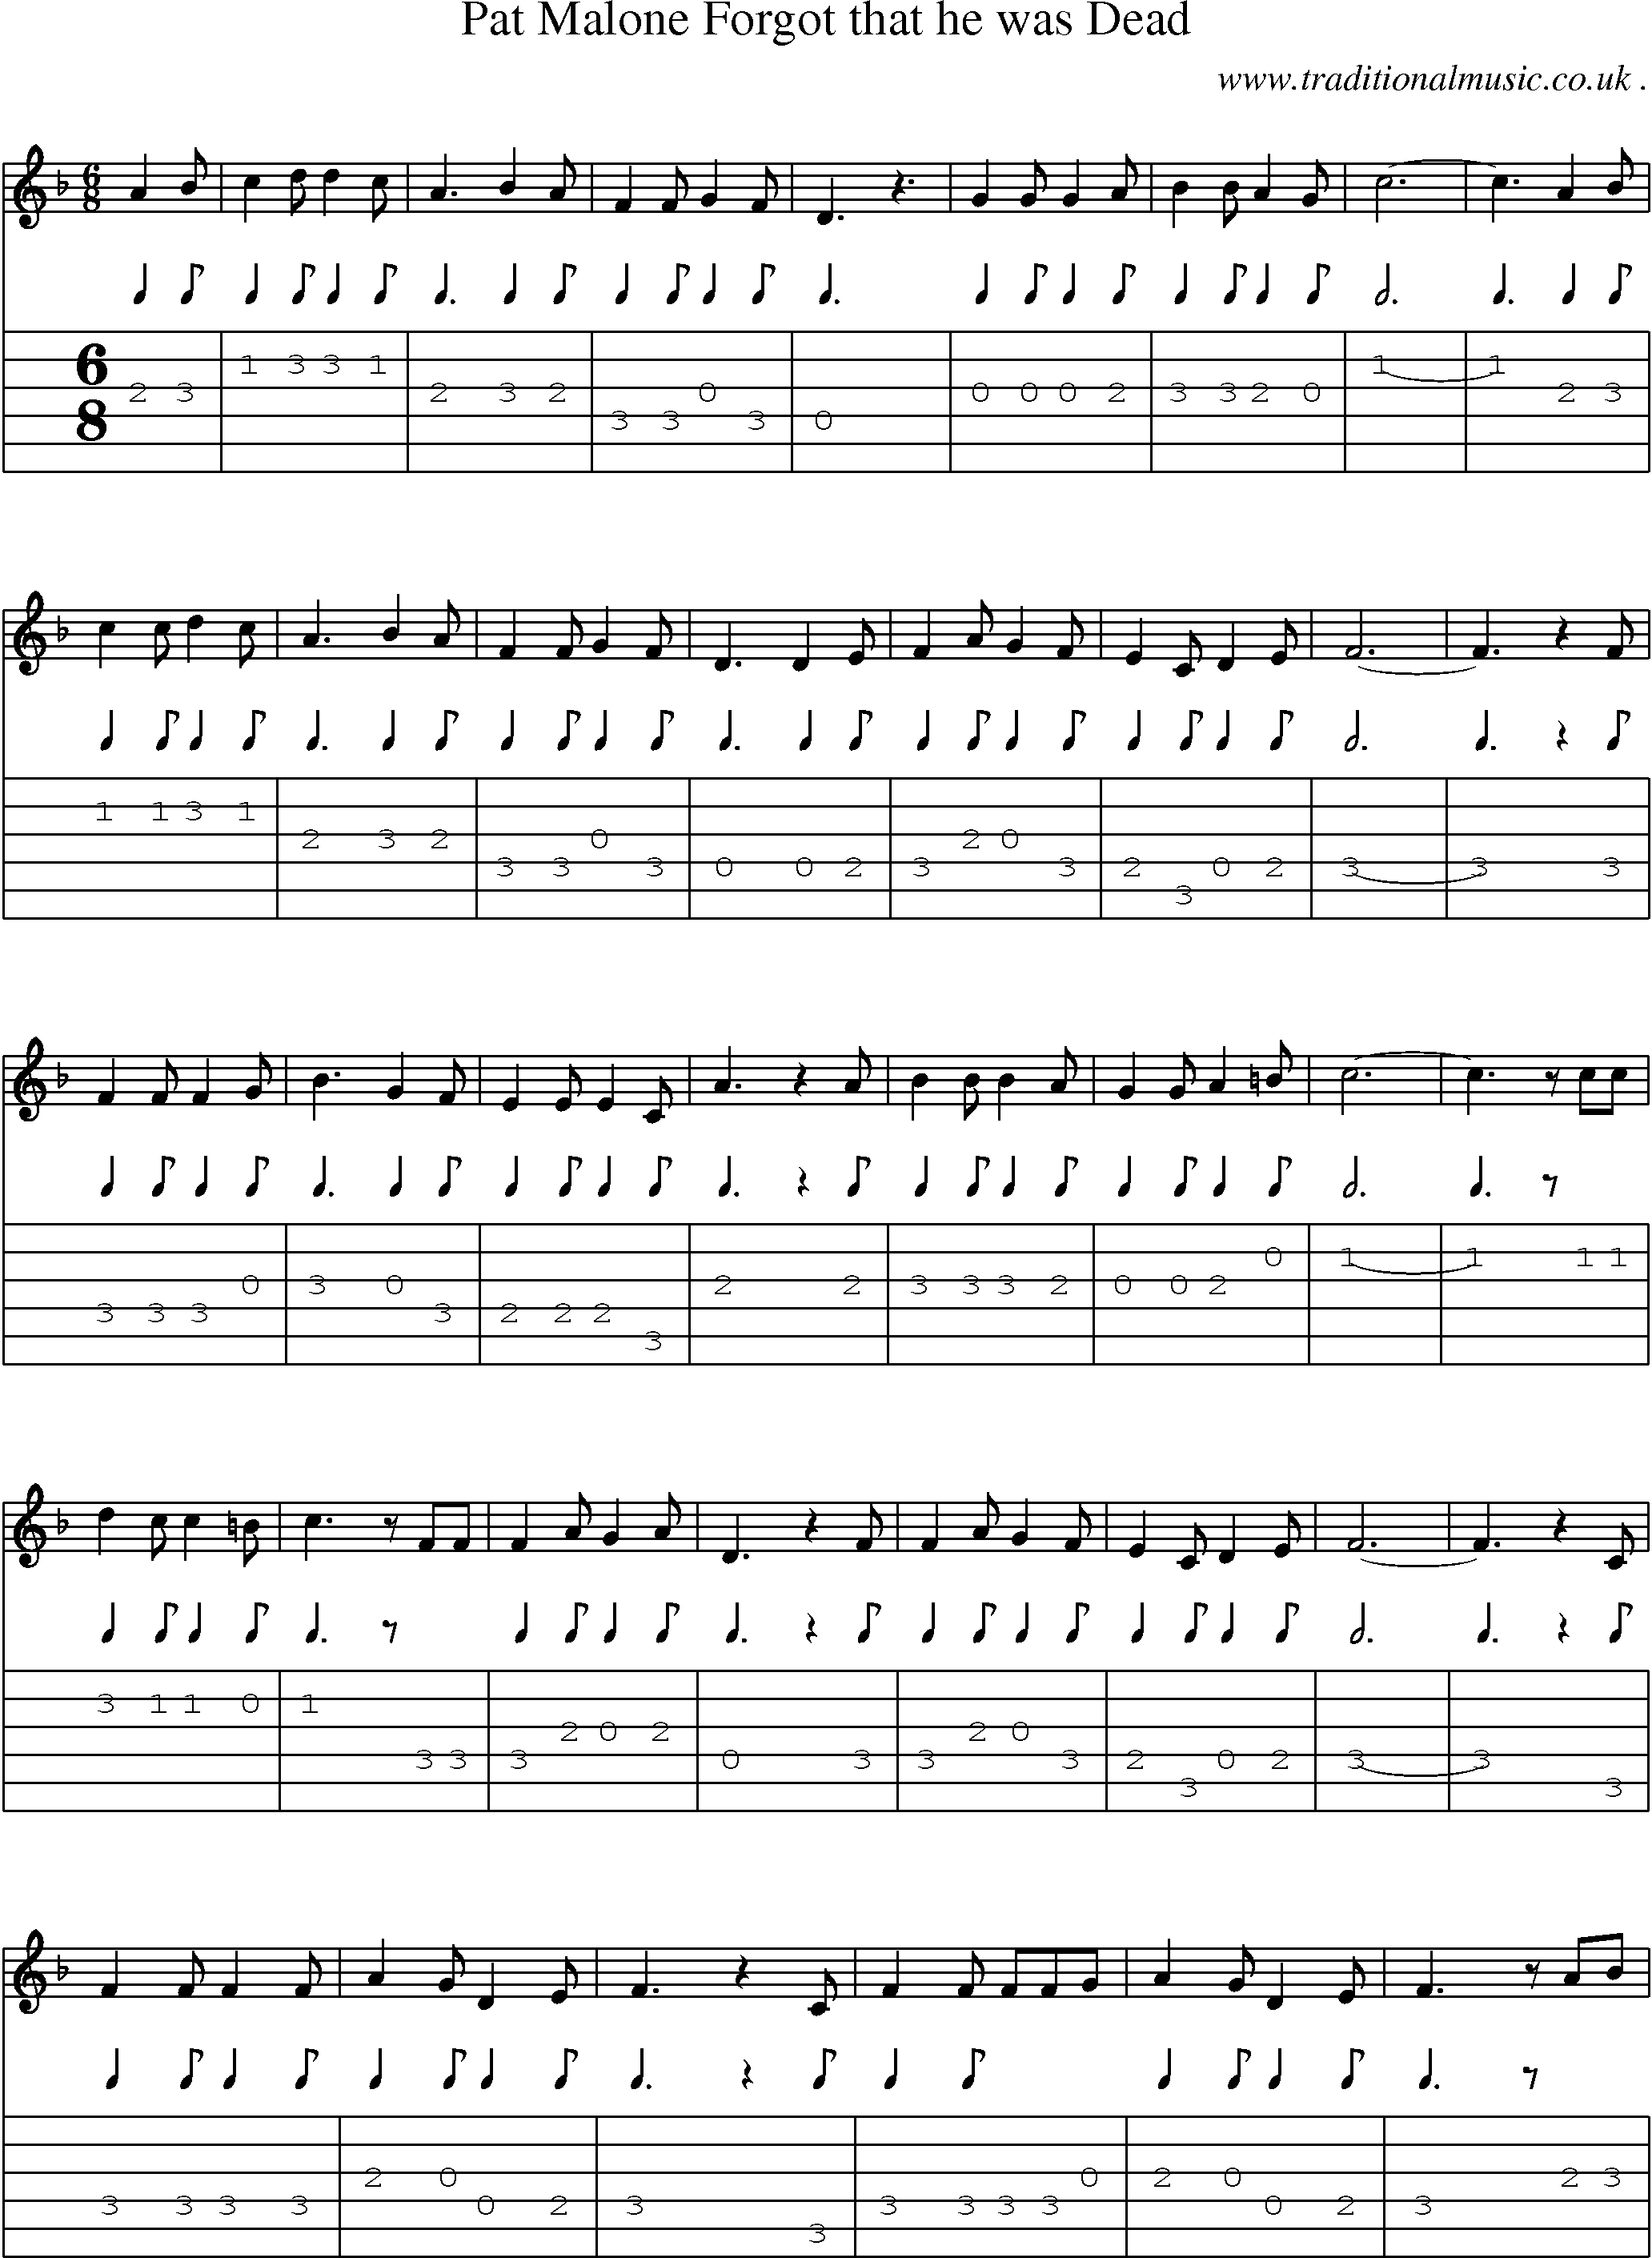 Sheet-Music and Guitar Tabs for Pat Malone Forgot That He Was Dead